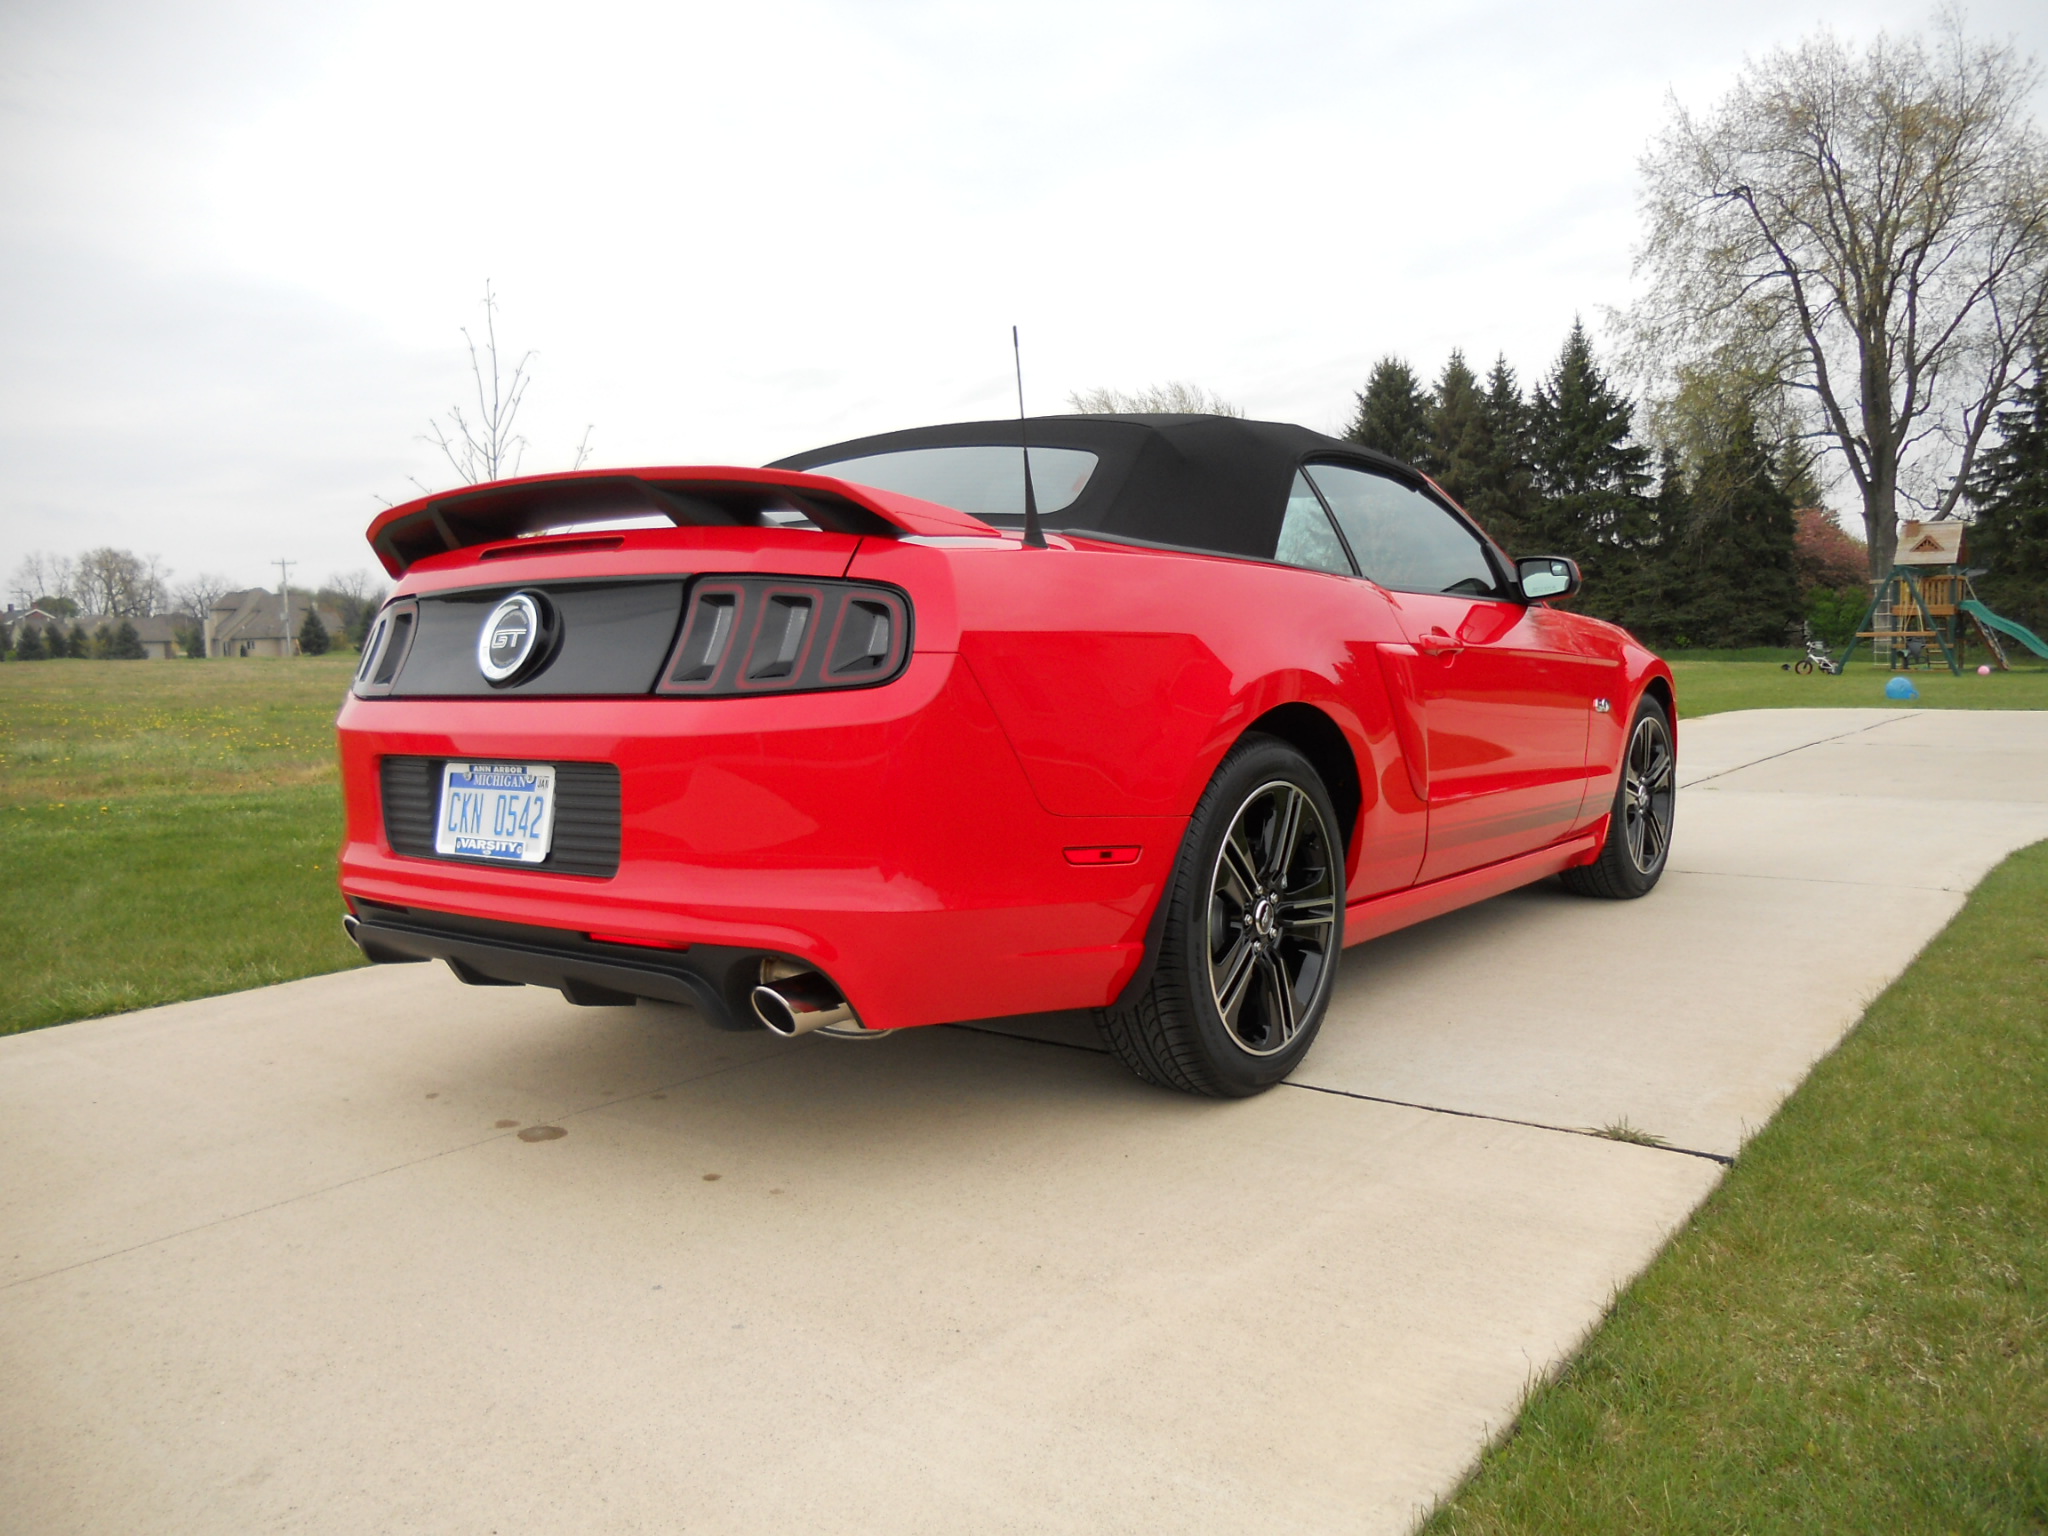 2013 Ford Mustang Gt Race Red